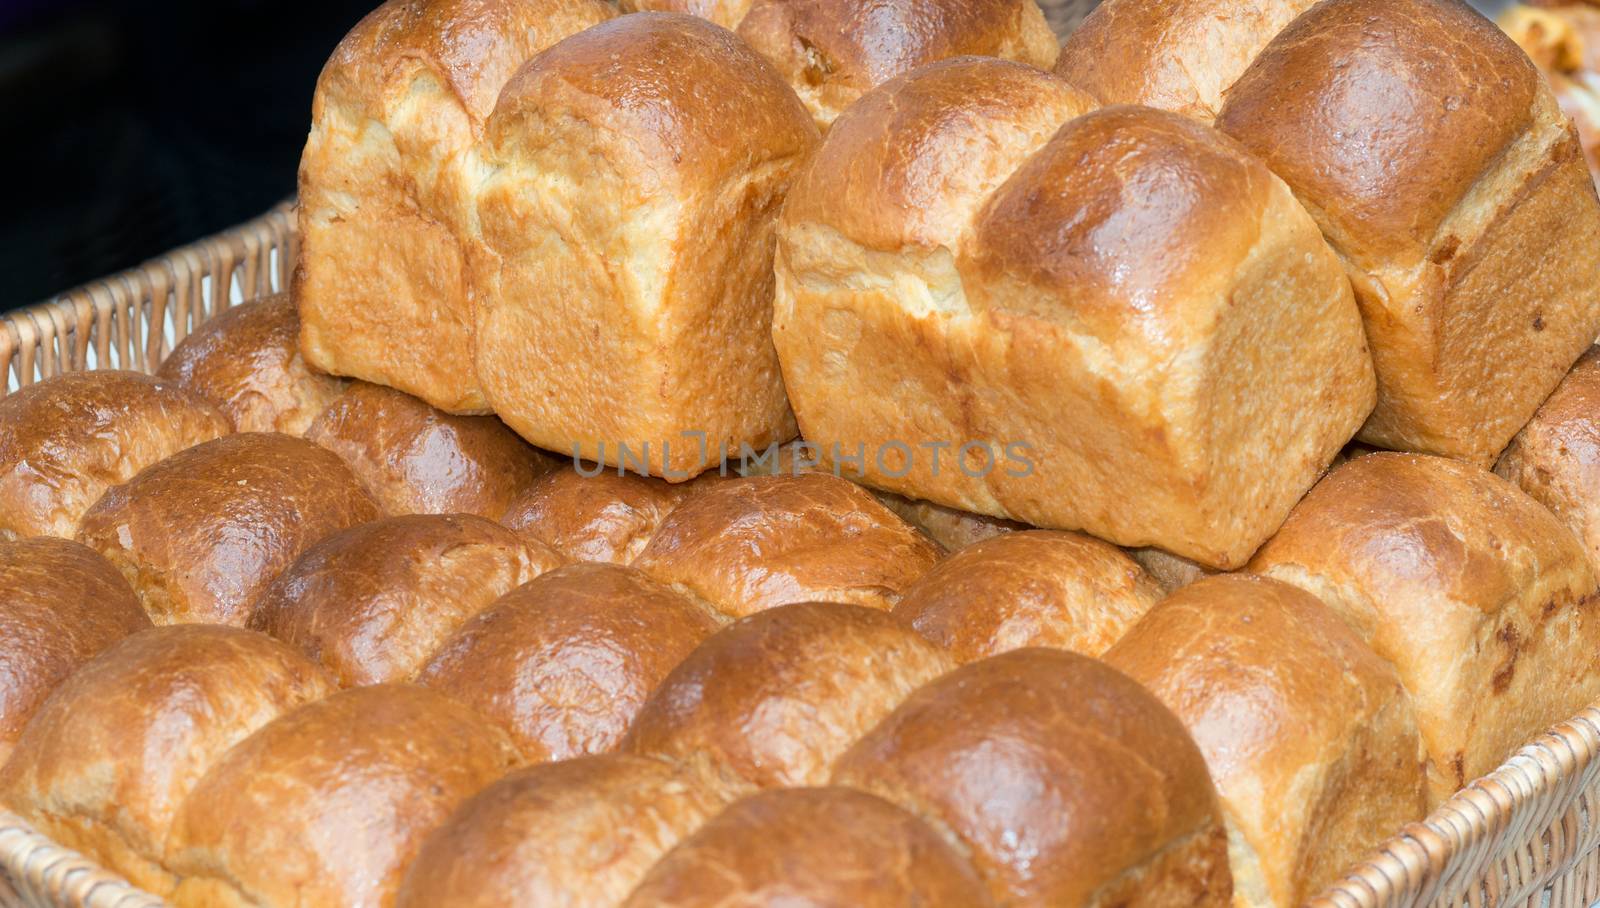 A Basket of Fresh Bread on a market stall